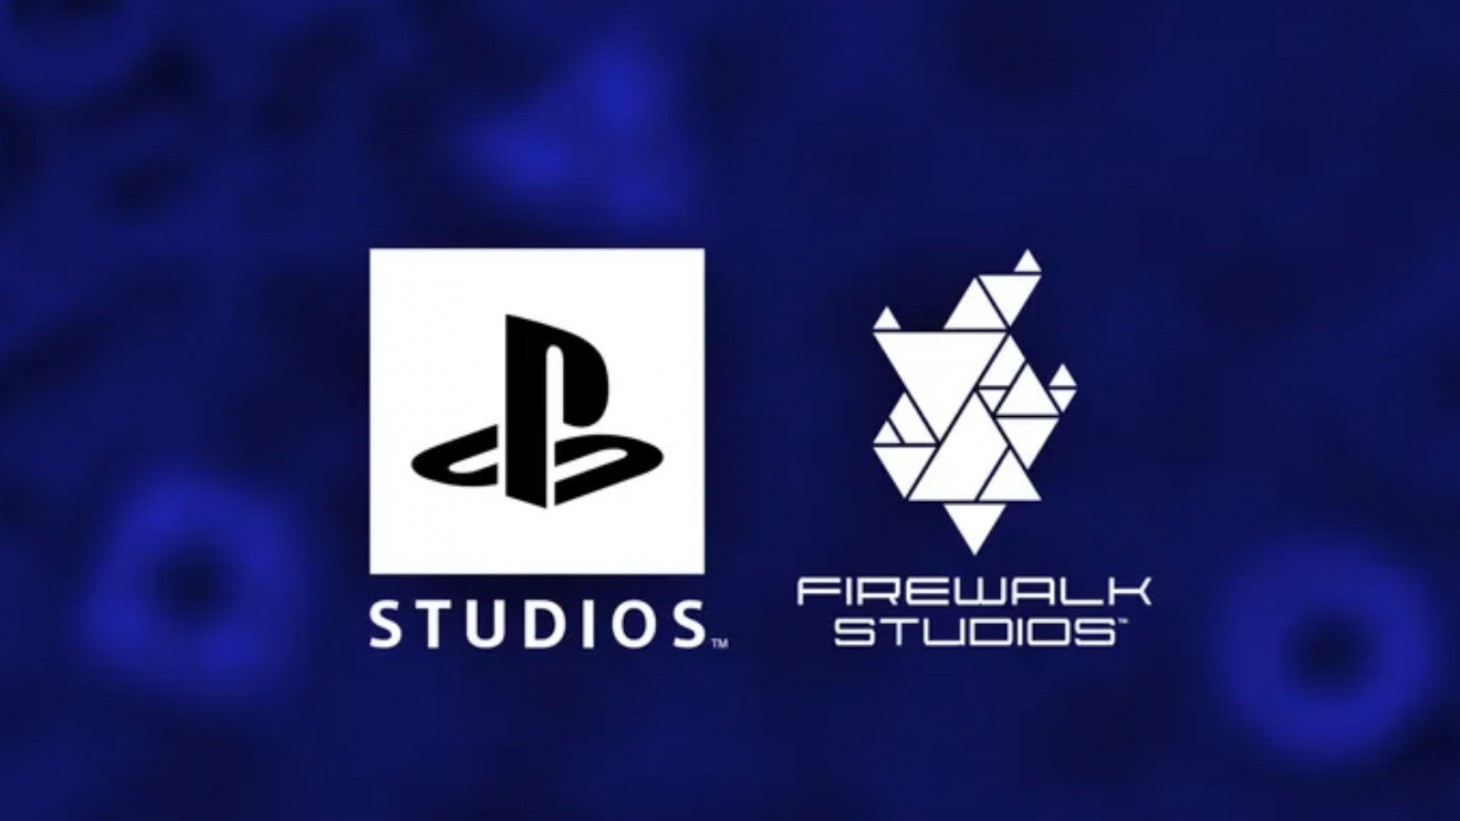 Firewalk Studios acquired acquisition playstation 5 Sony AAA multiplayer game